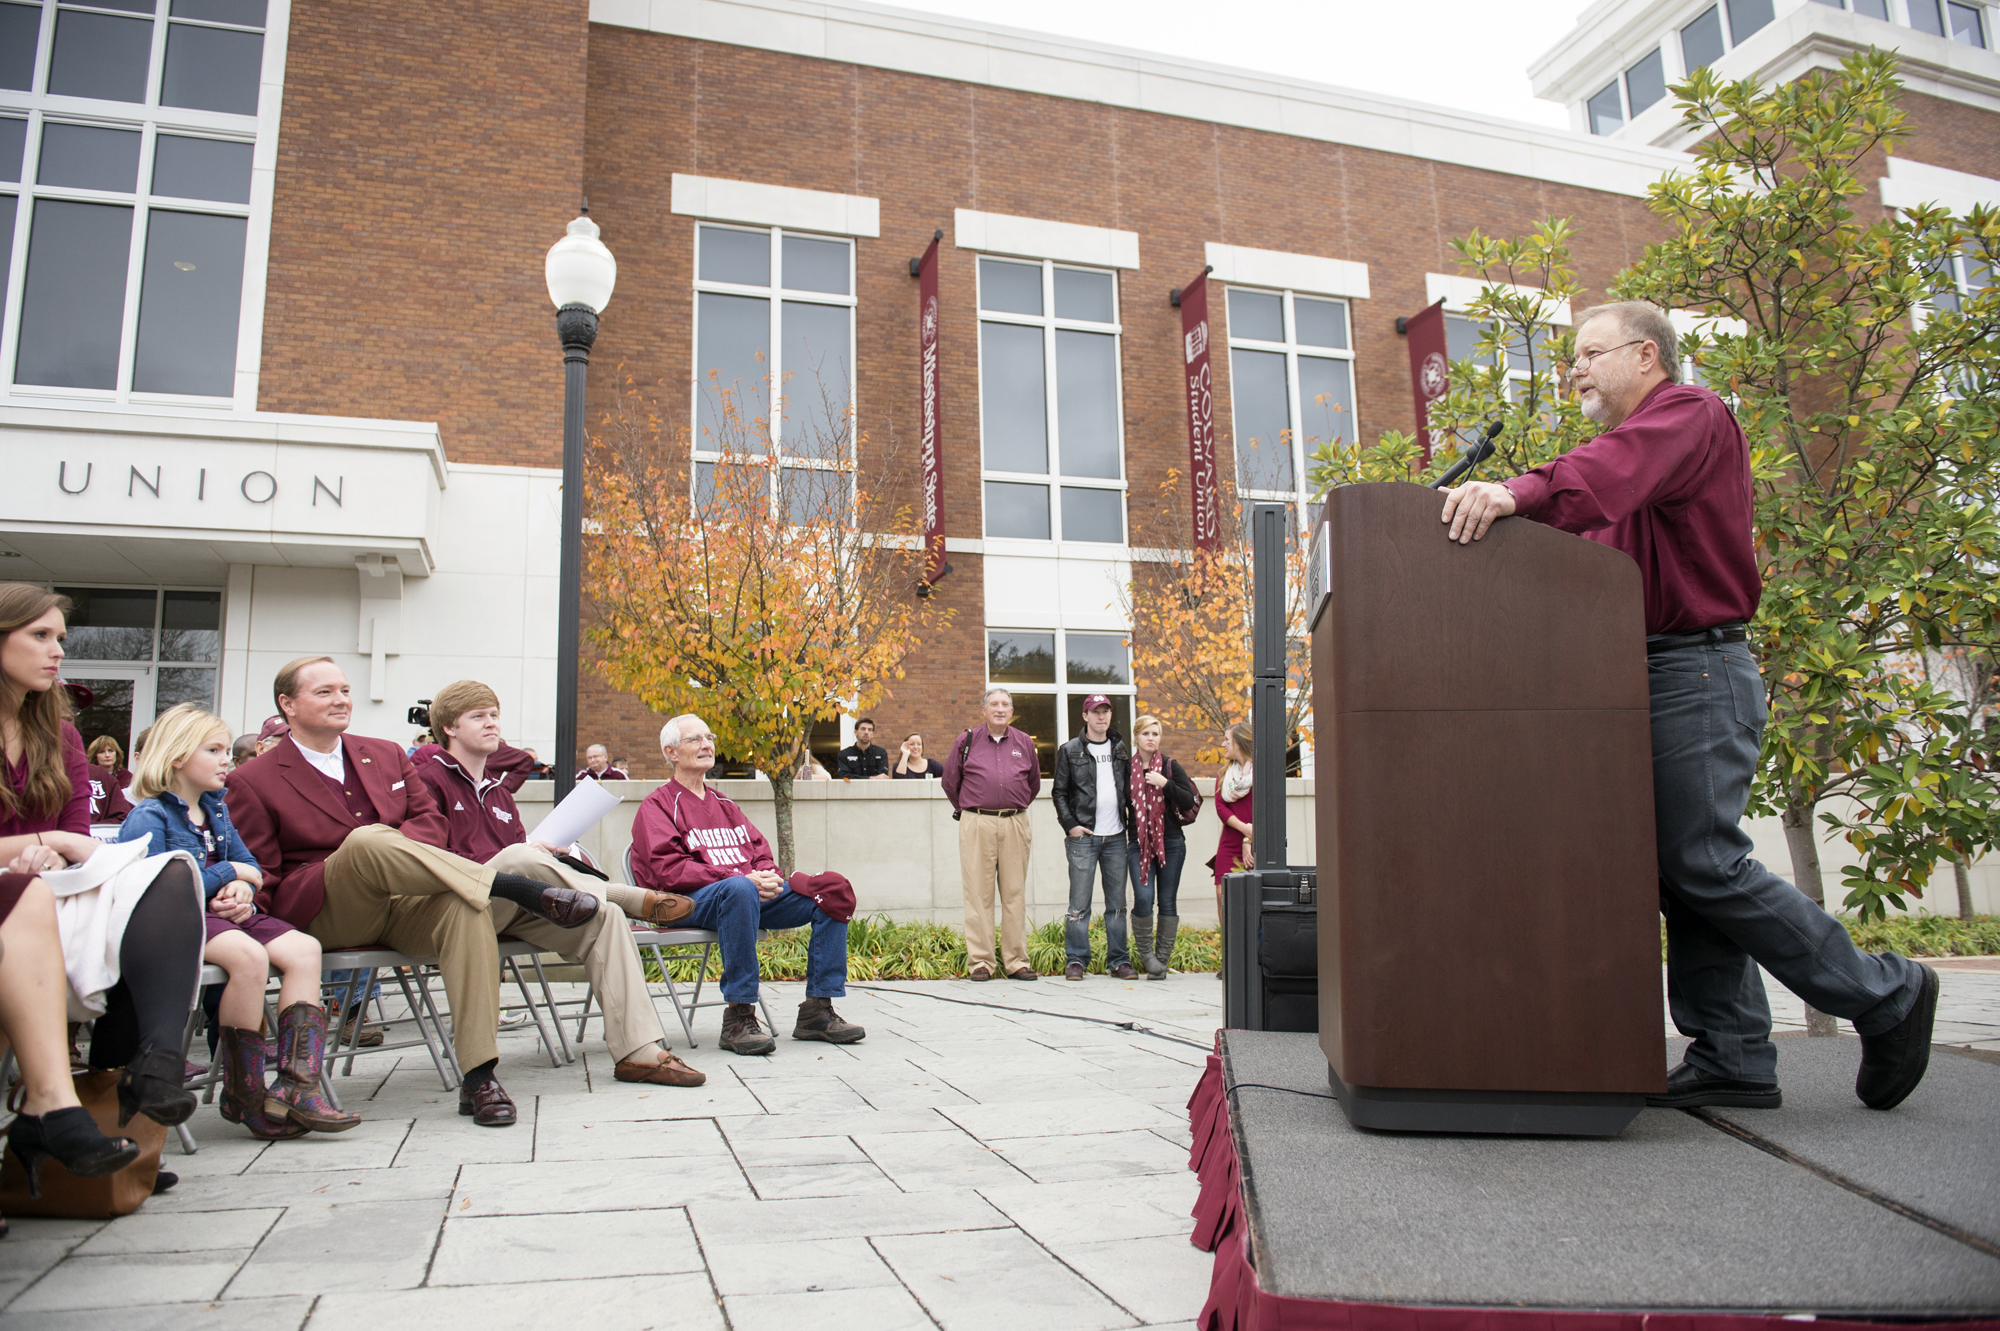 Hart Bailey, former Holland Faculty Senate president and Mississippi State alumnus, said that the stories told around the Bull Ring over the decades are what make the restoration of the site so important.